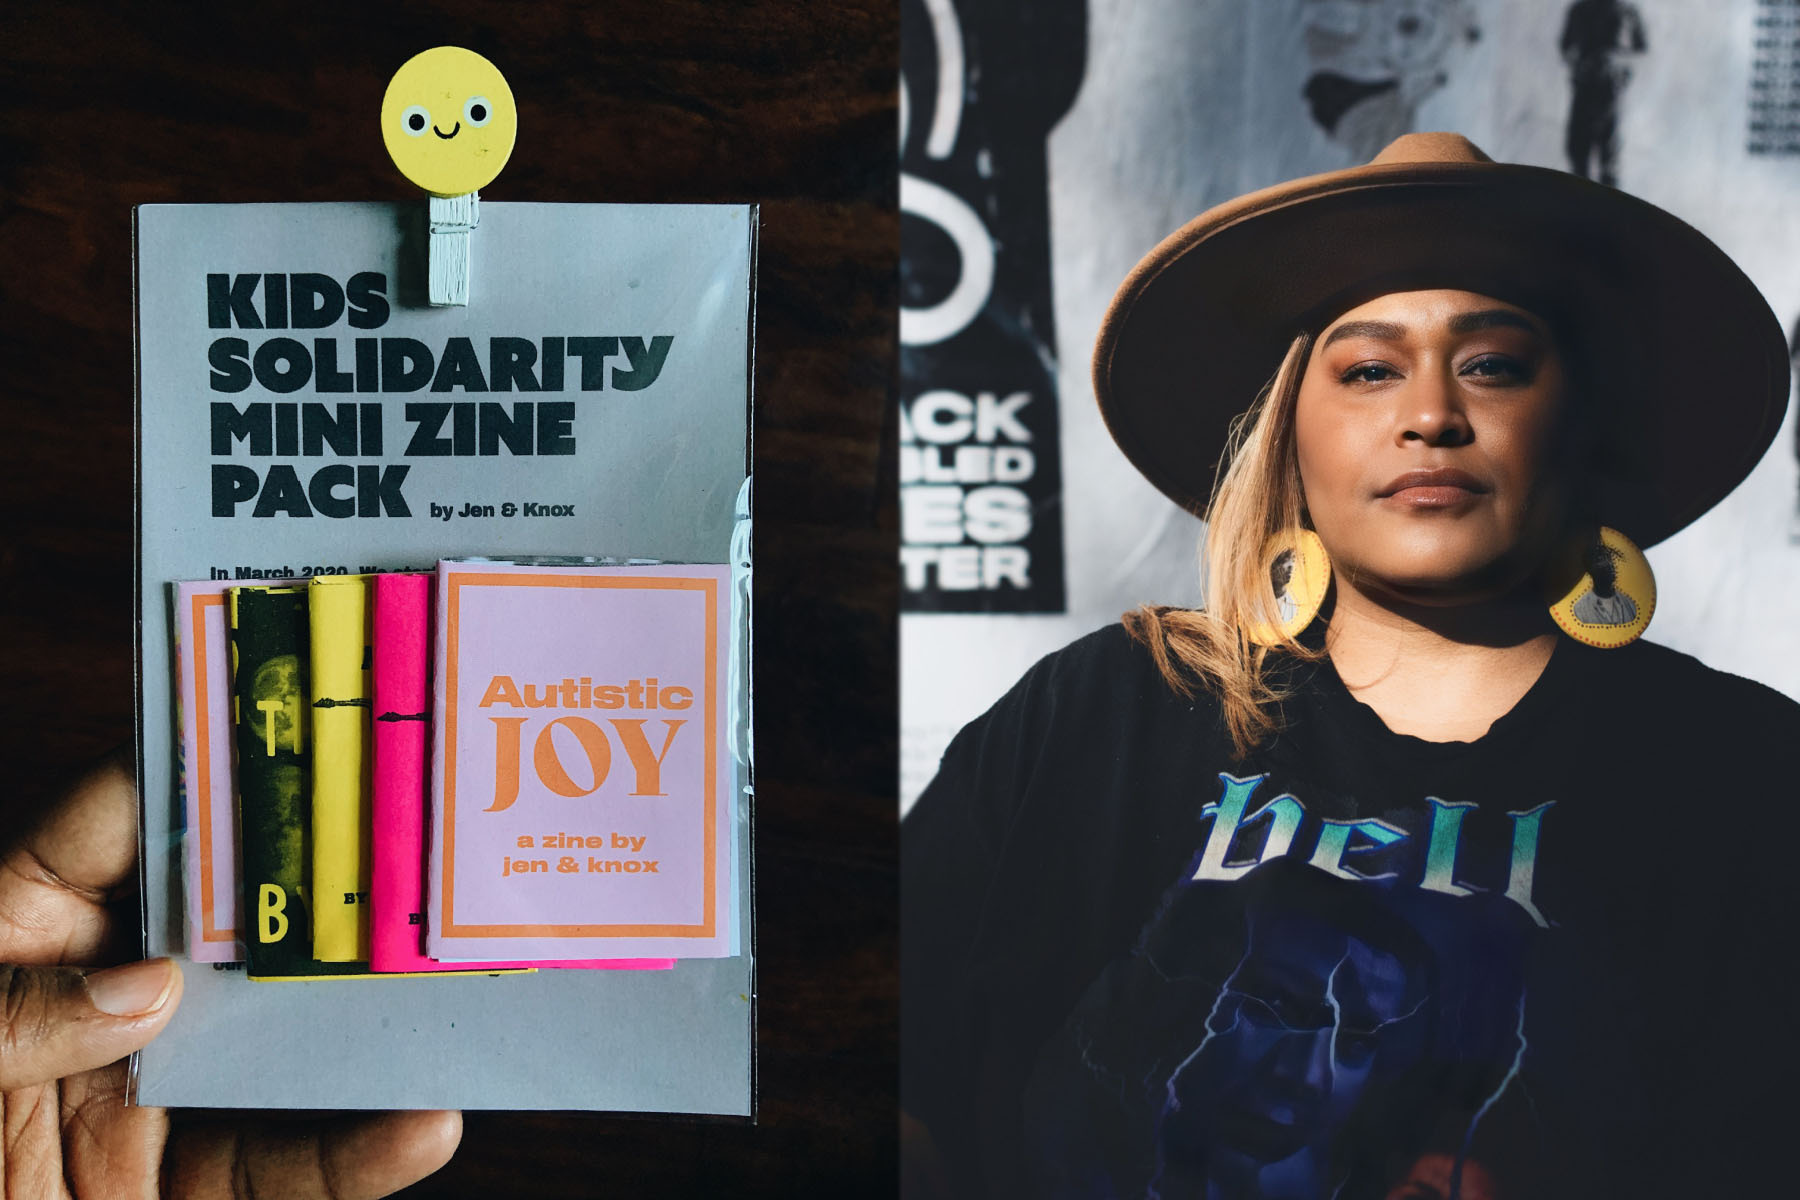 Diptych of Jen White Johnson posing for a portrait and a mini zine pack she designed.